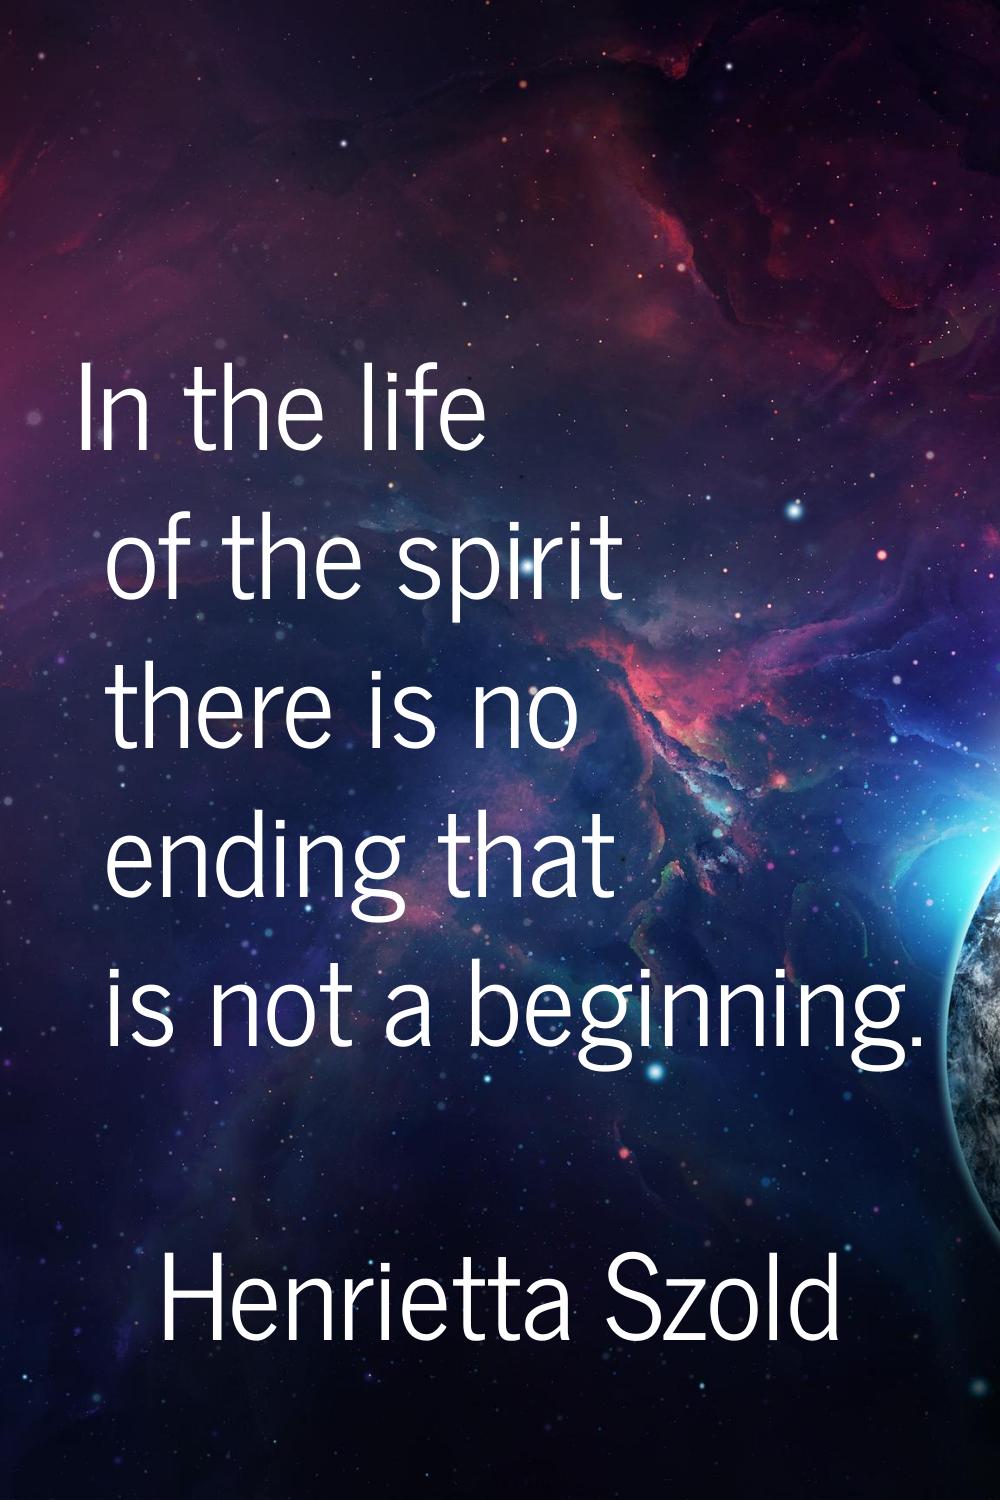 In the life of the spirit there is no ending that is not a beginning.